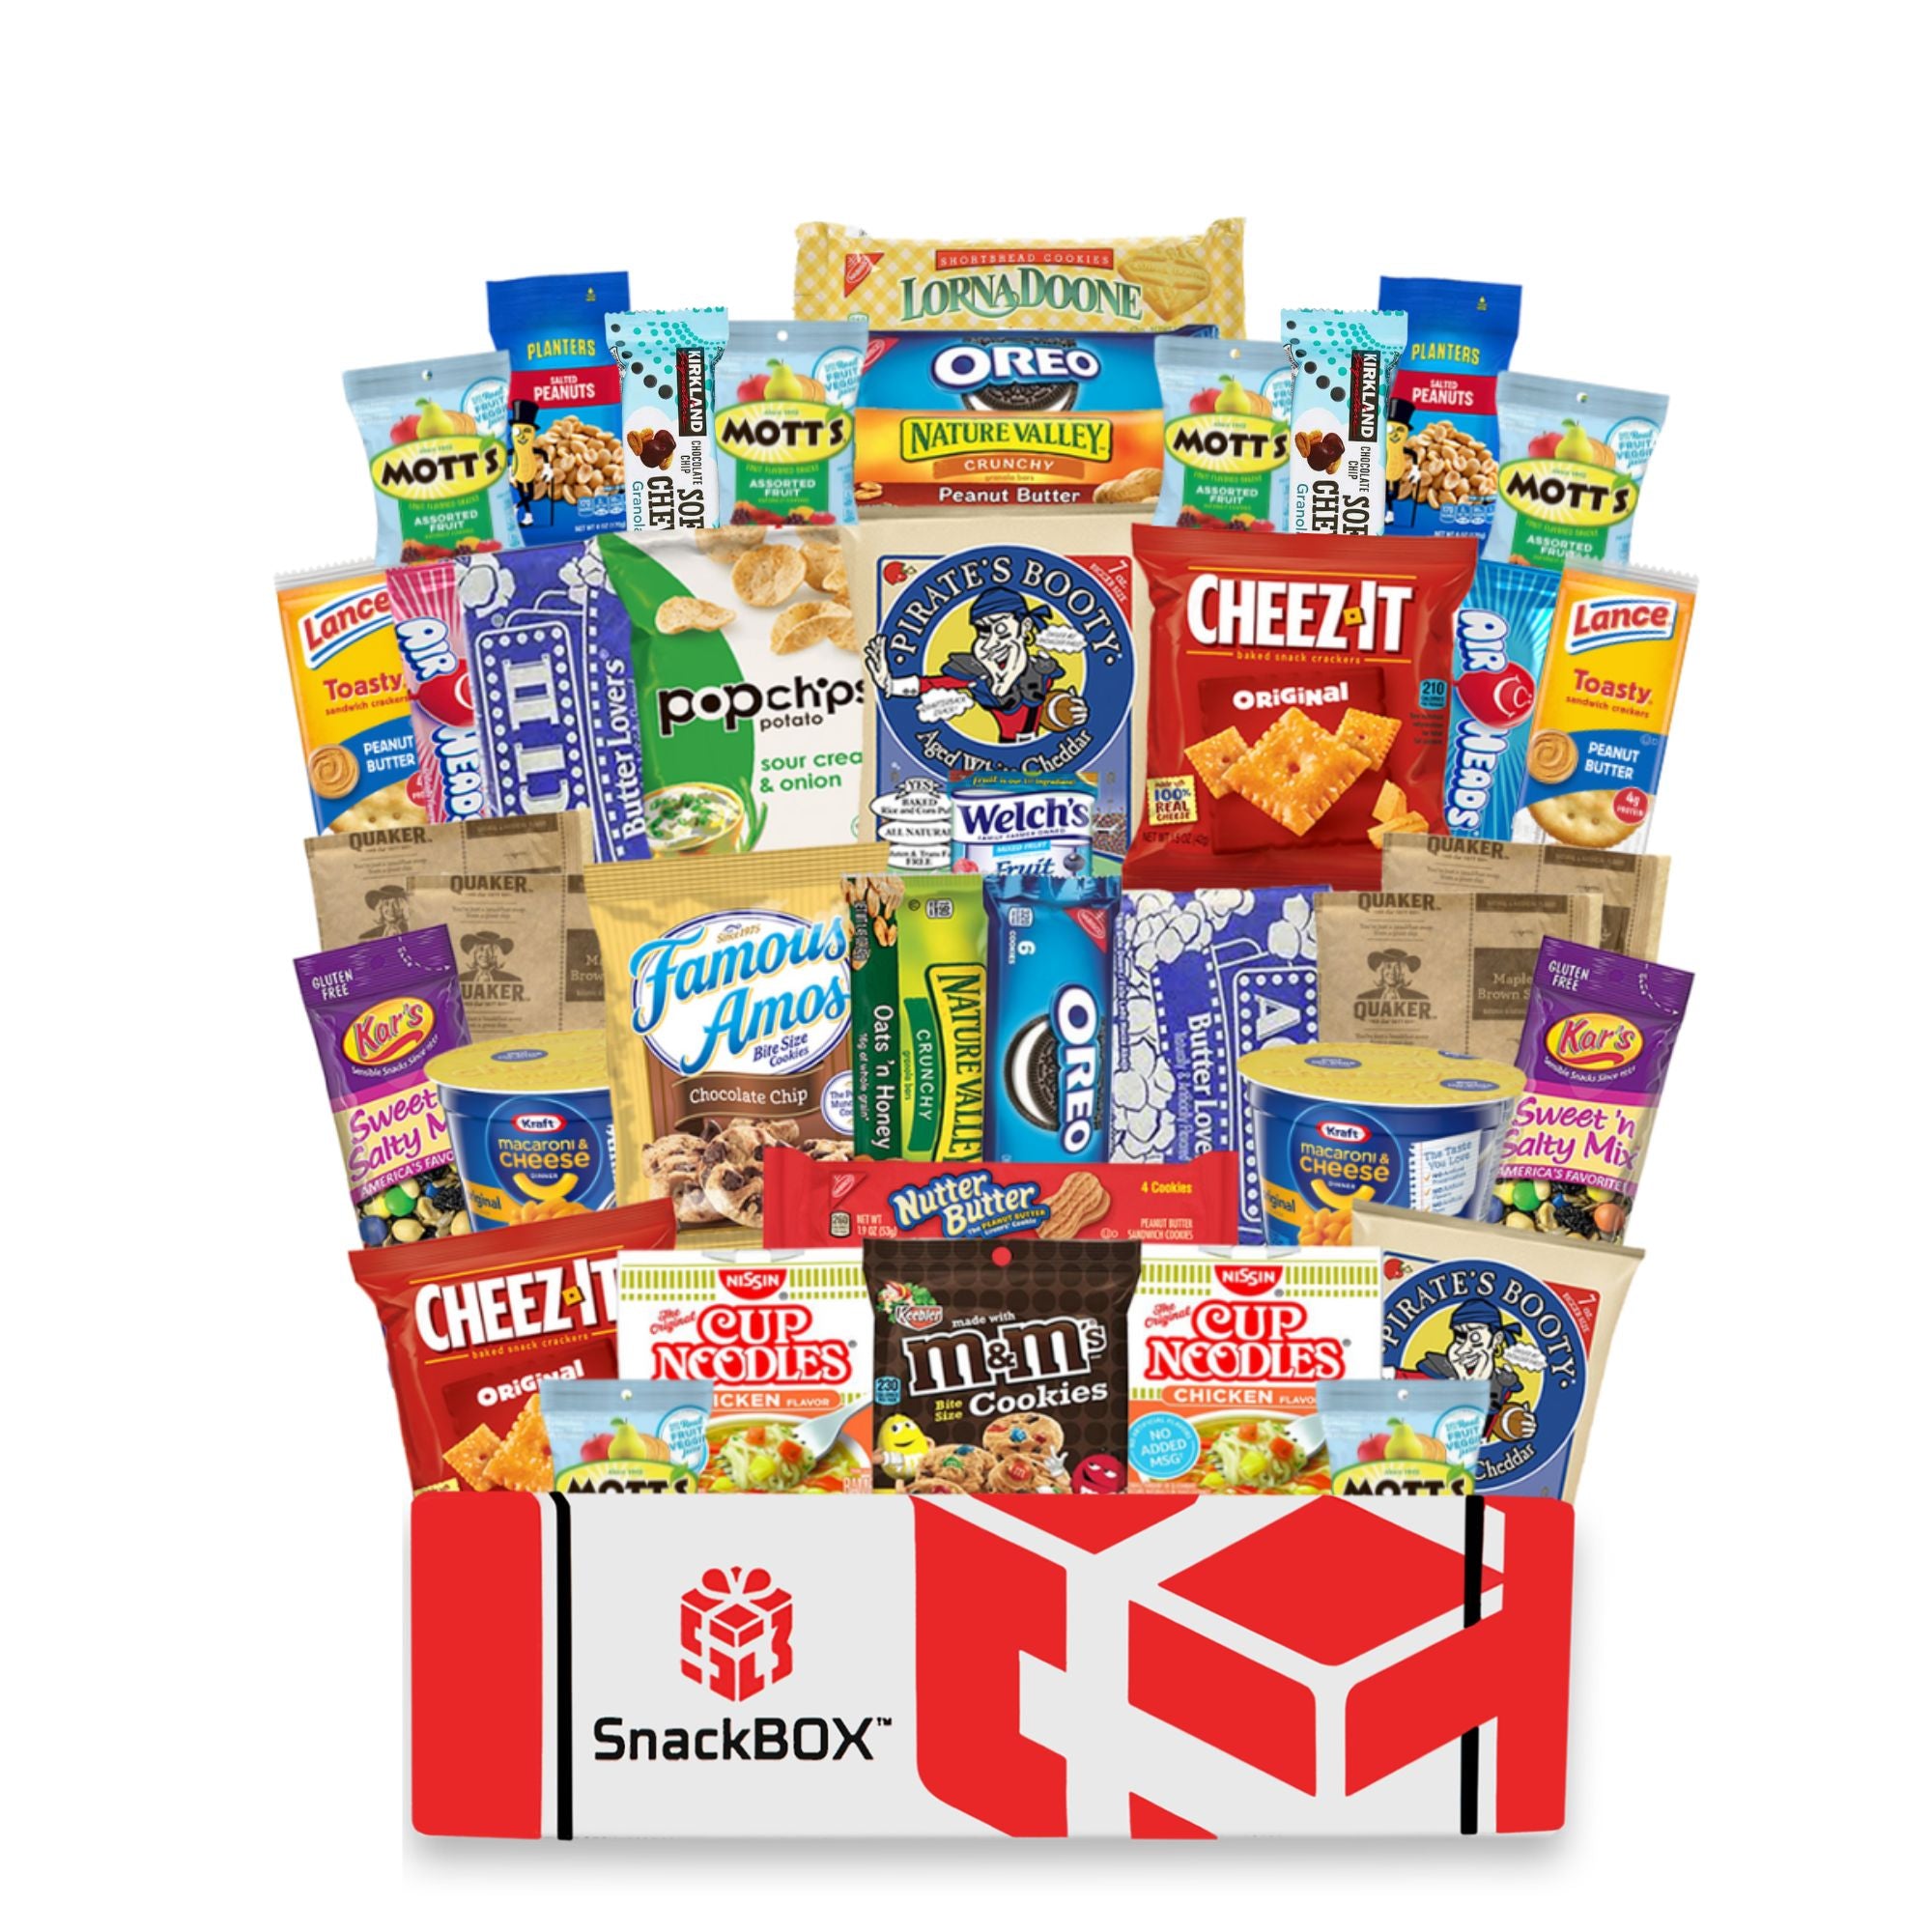 Premium Penguin Everyday Care Package (50 Count + 1 Bonus Snack) Snack Box - An Assortment of Chips, Crackers, Candy, Cookies, Bars for Military